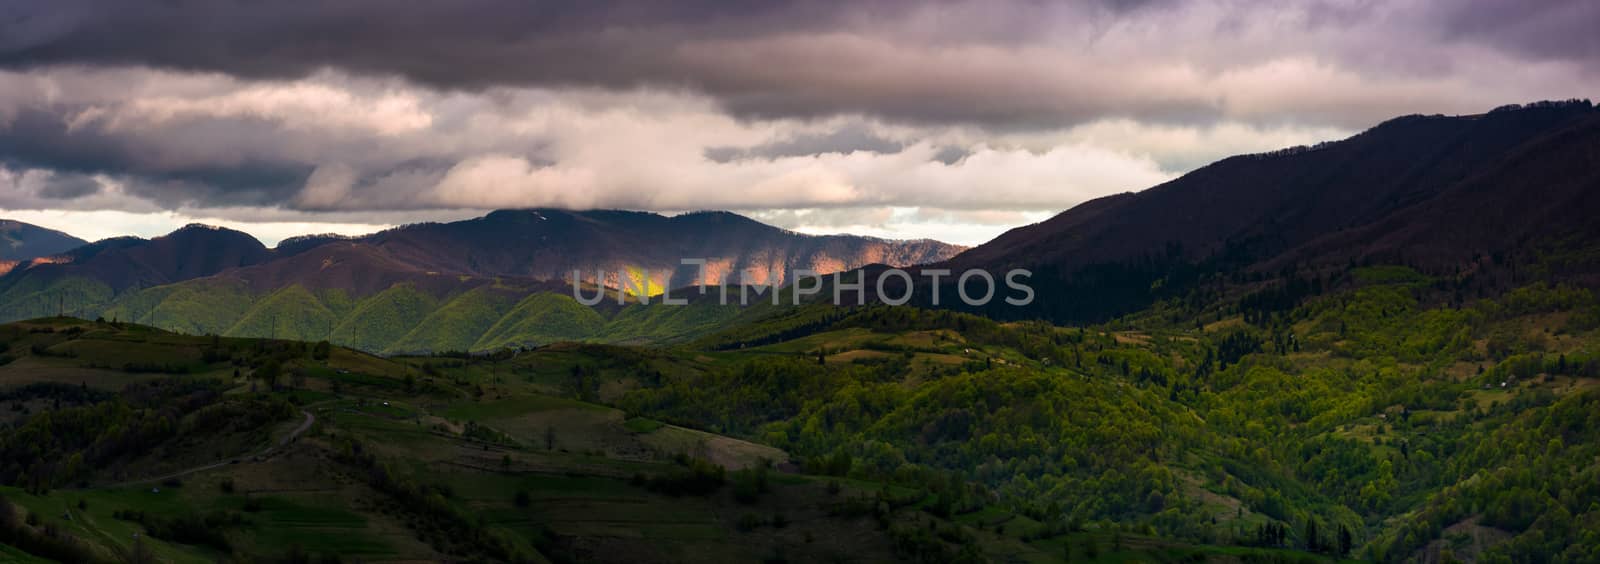 cloudy sunset in mountainous countryside by Pellinni